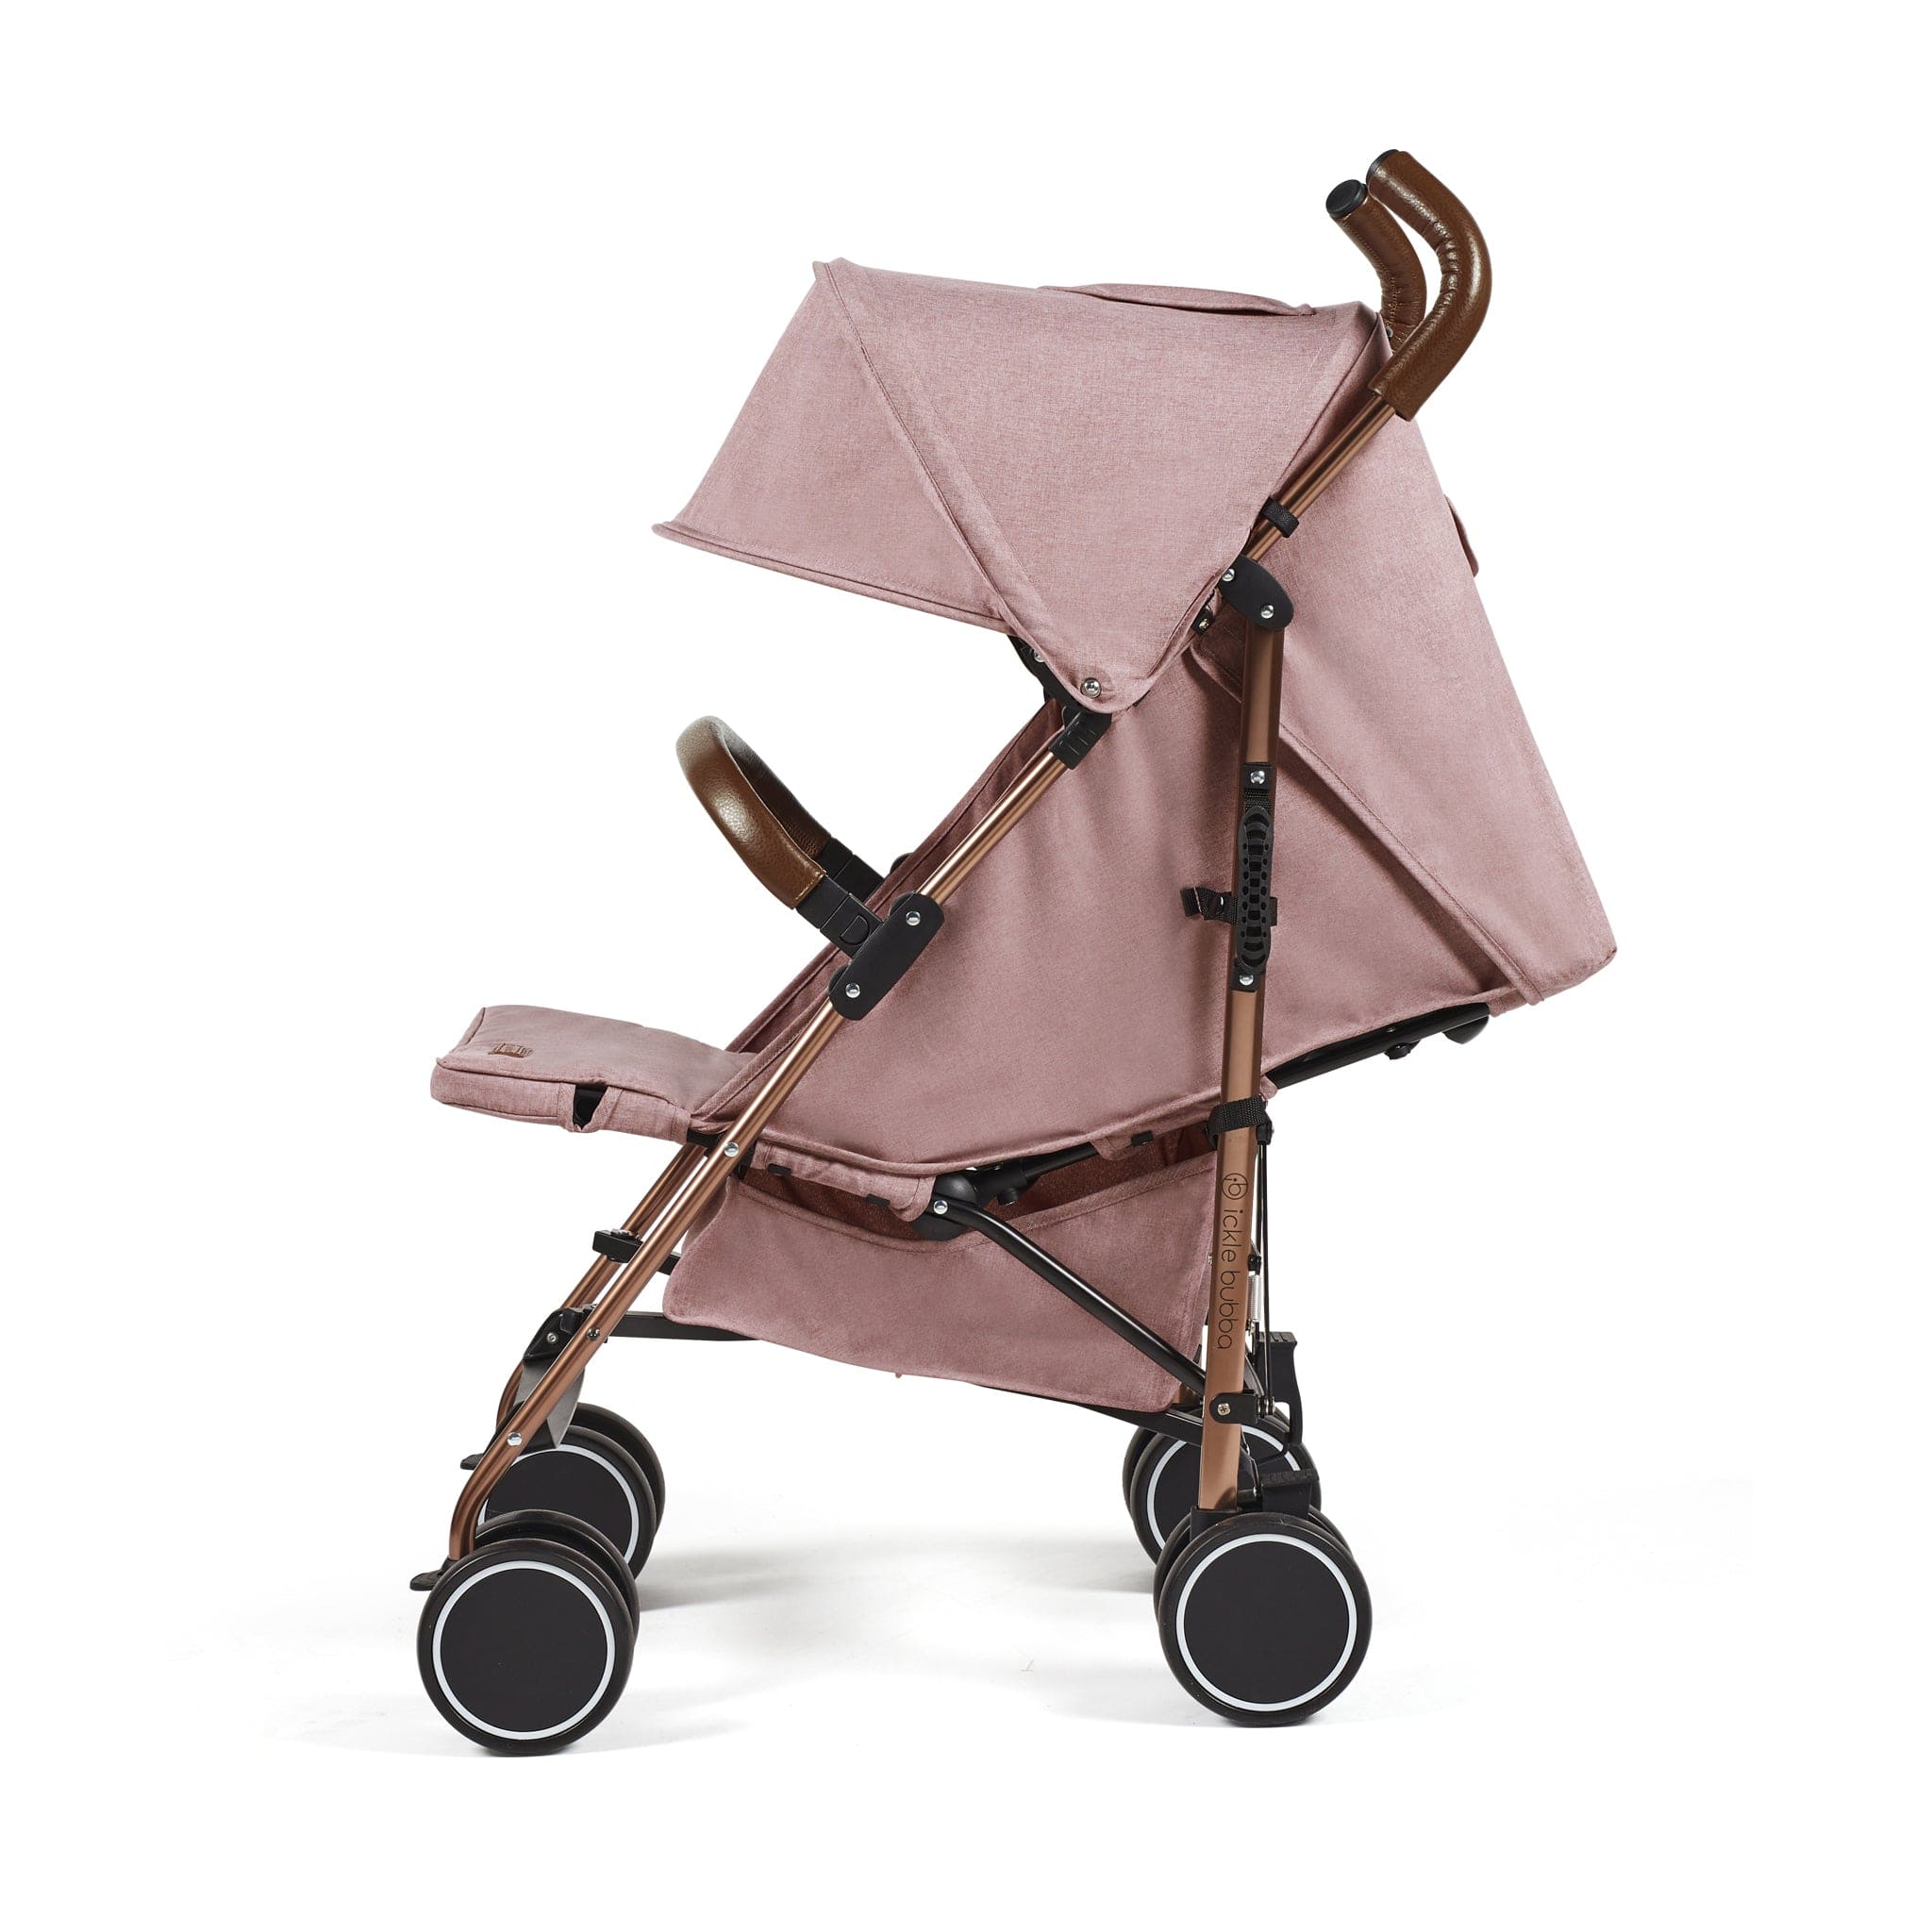 Ickle Bubba baby pushchairs Ickle Bubba Discovery Max Pushchair Dusky Pink/Rose Gold 15-002-200-121